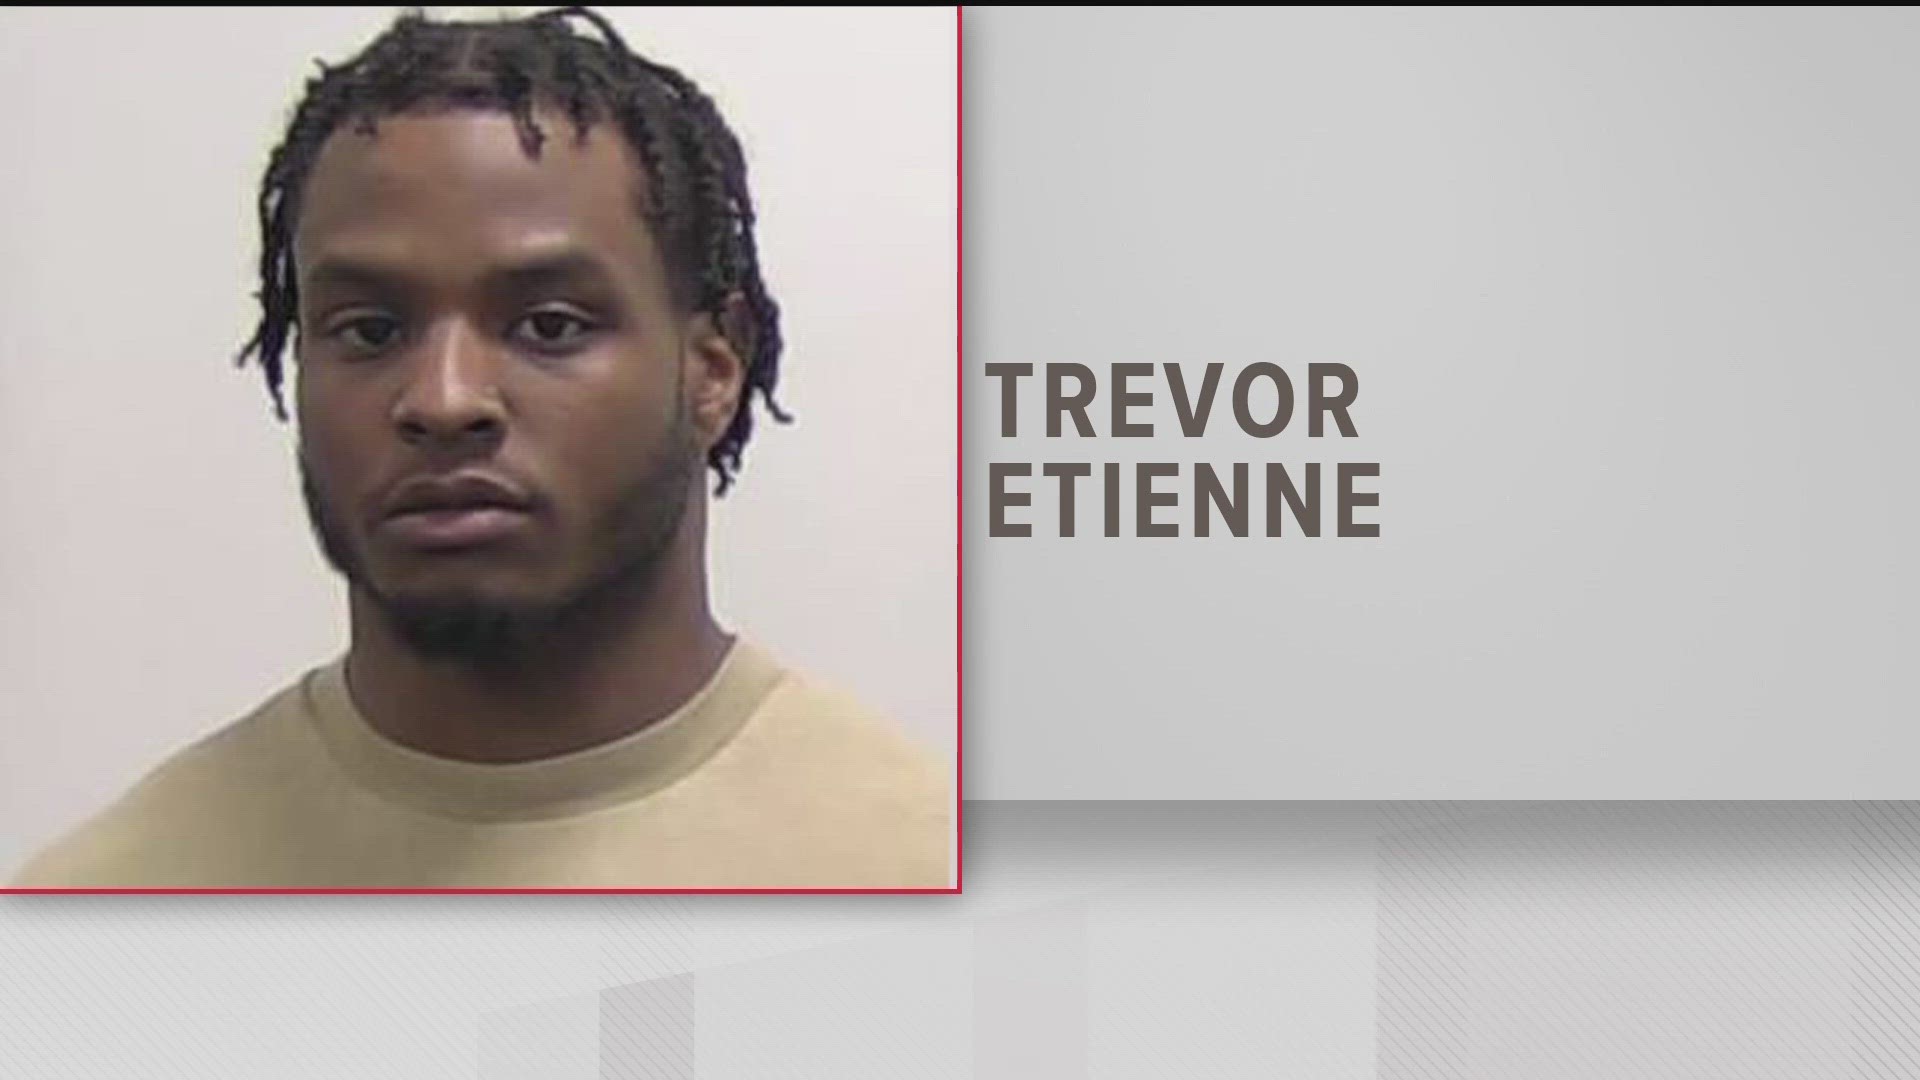 11Alive's sources said Etienne posted bail of over $1,800 after being arrested by Athens Clarke County Police at 4:35 a.m.